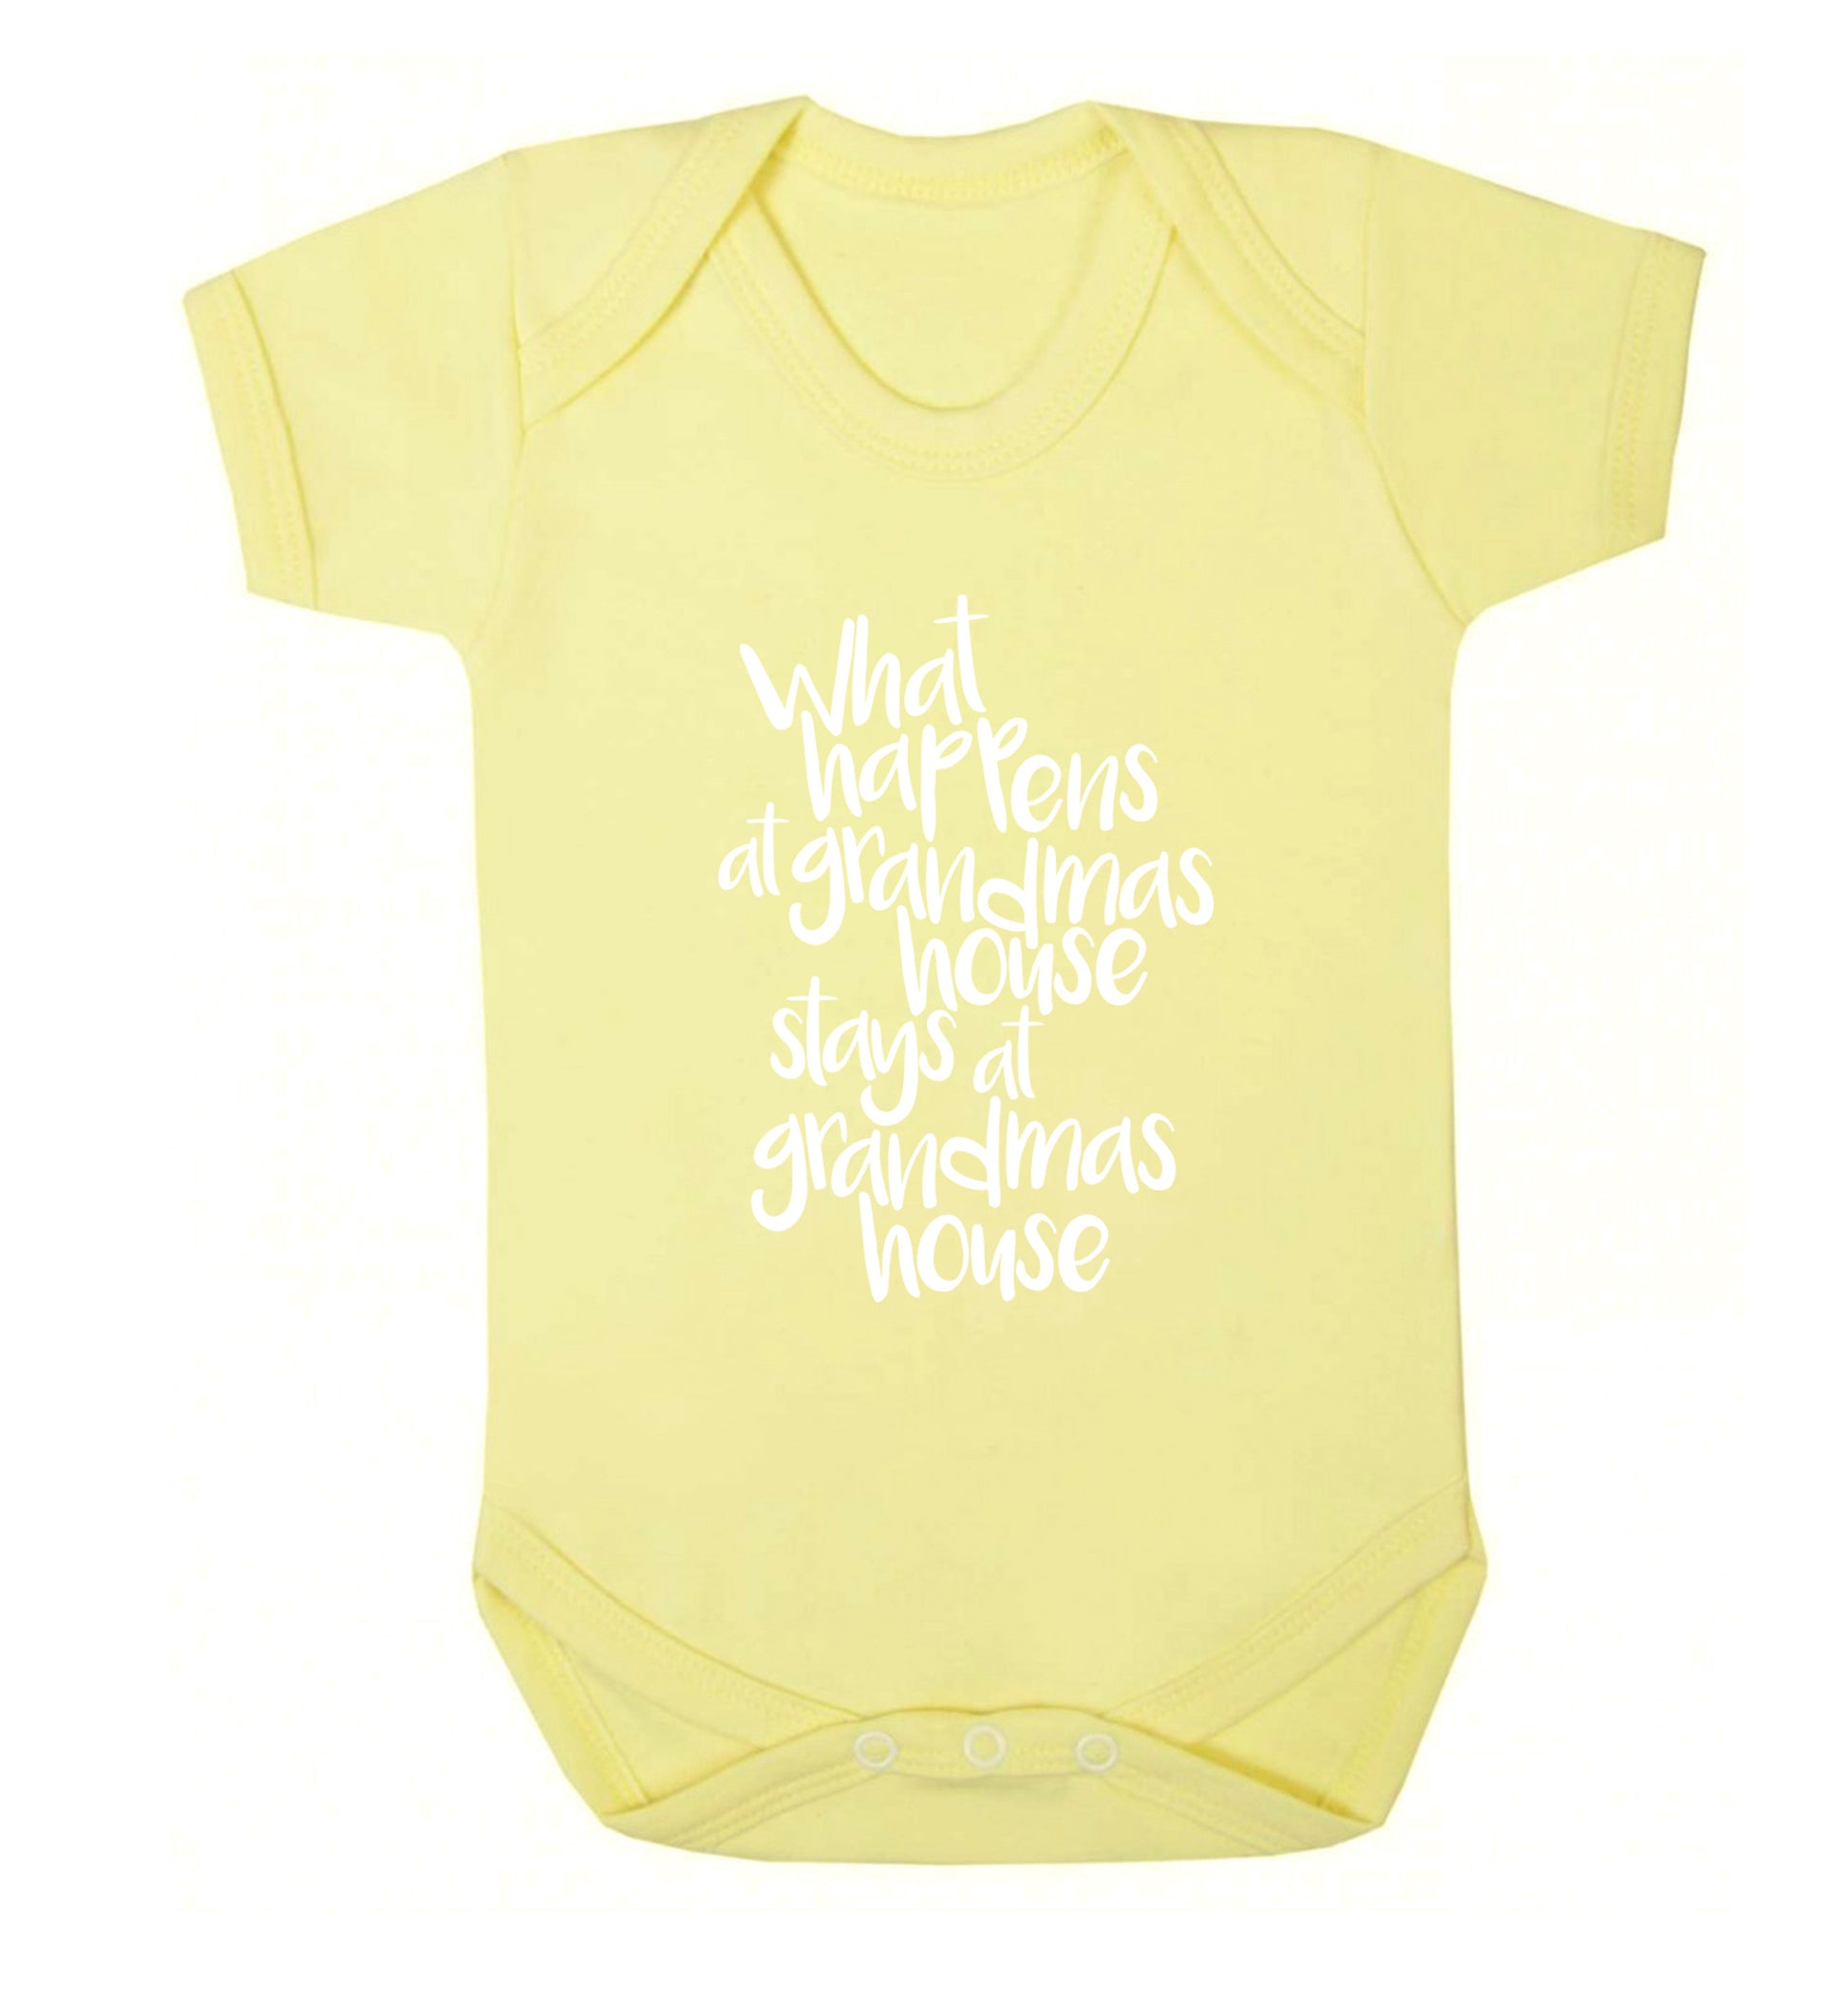 What happens at grandmas house stays at grandmas house Baby Vest pale yellow 18-24 months